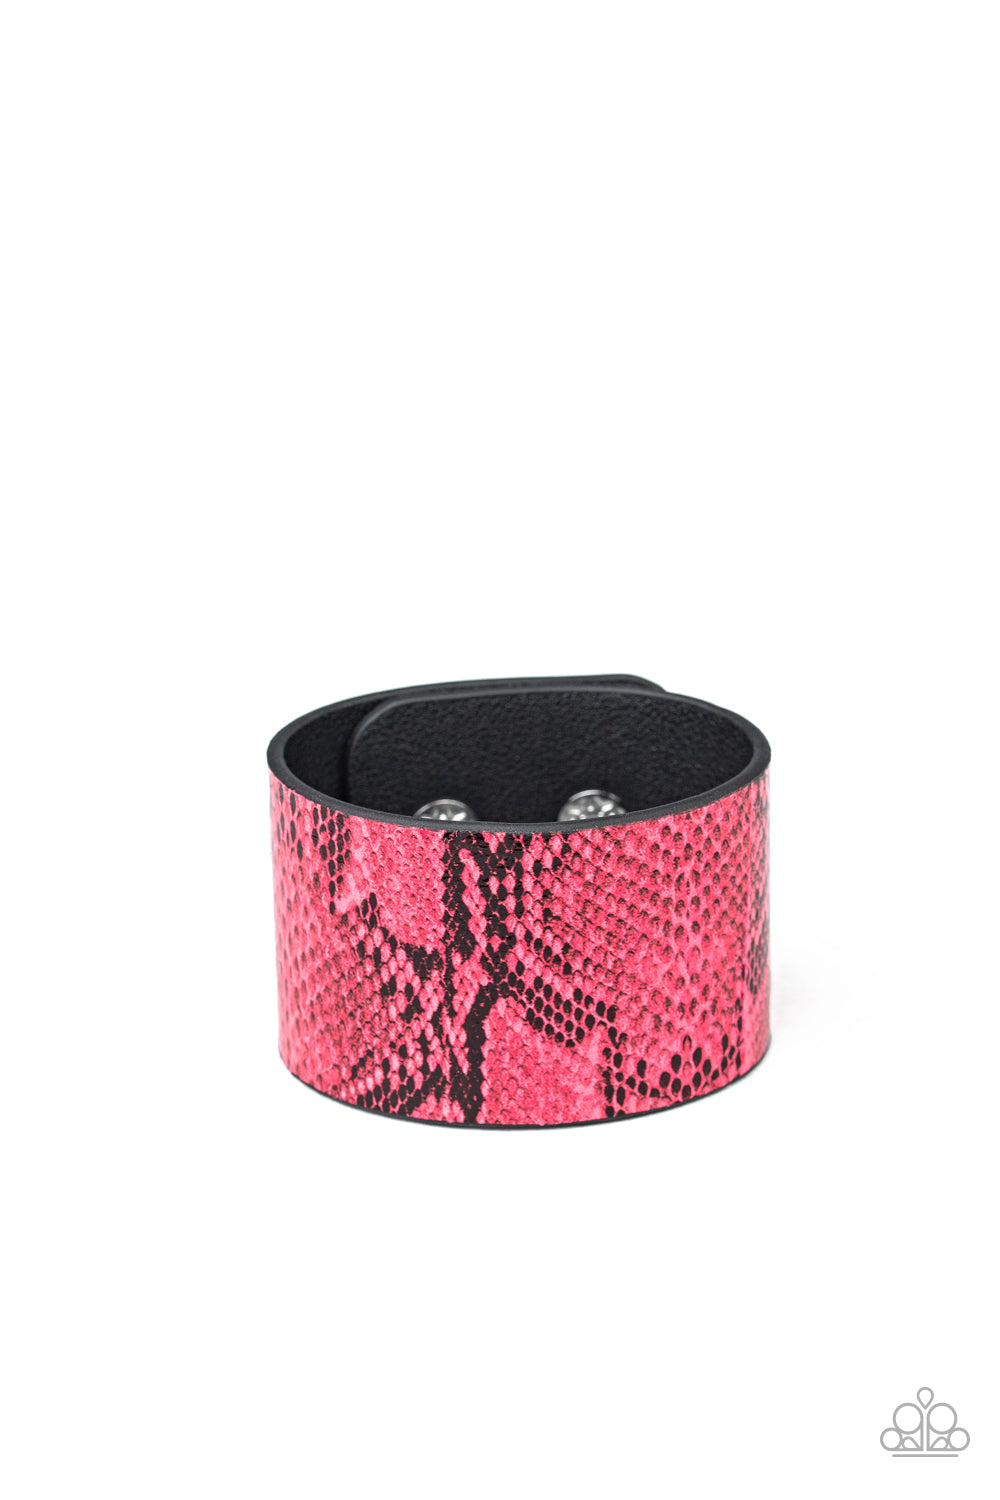 IT'S A JUNGLE OUT THERE - PINK SNAKESKIN WRAP BRACELET